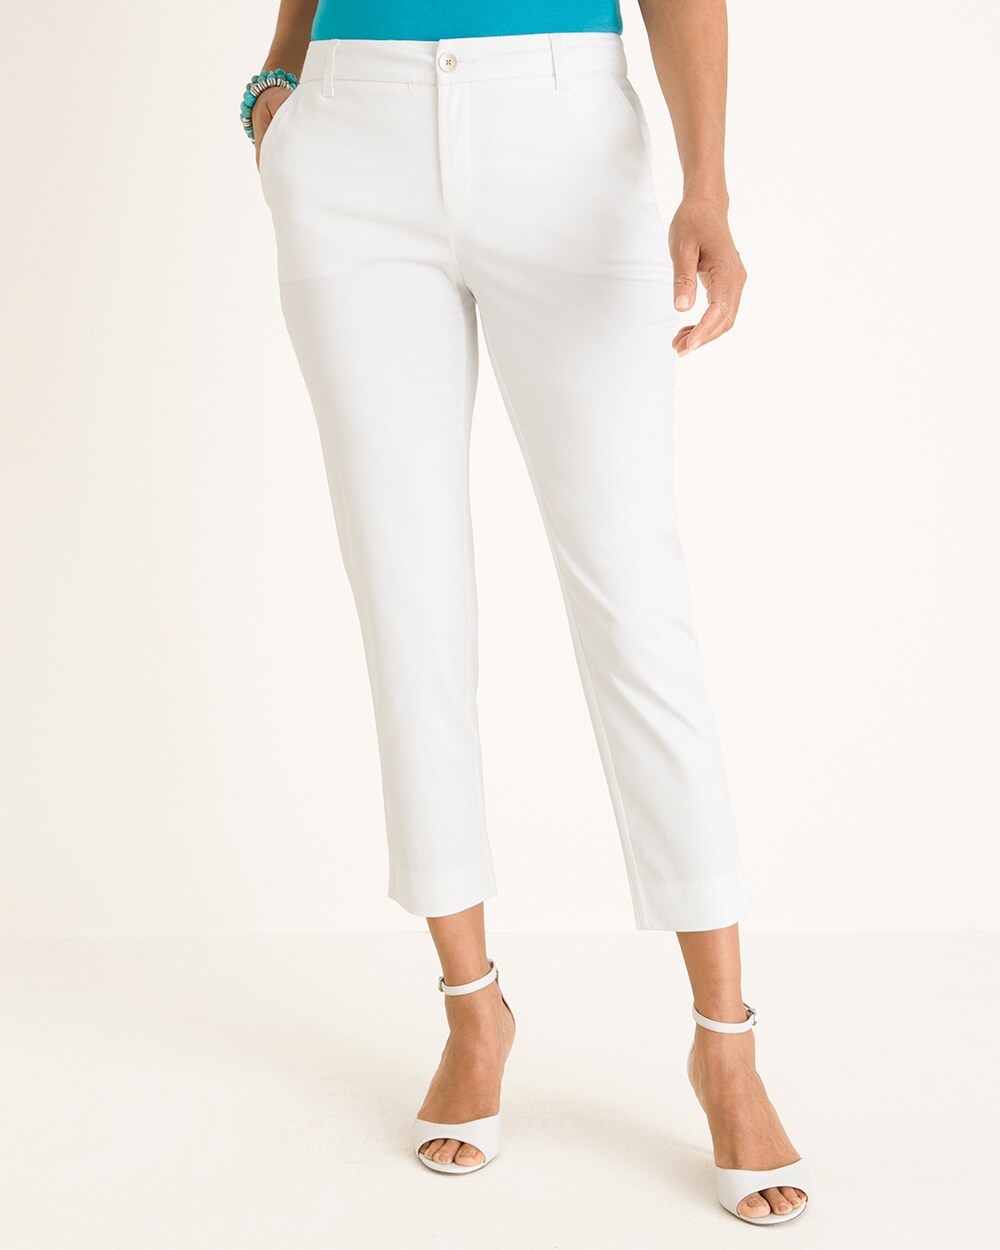 Polished Chino Ankle Pants